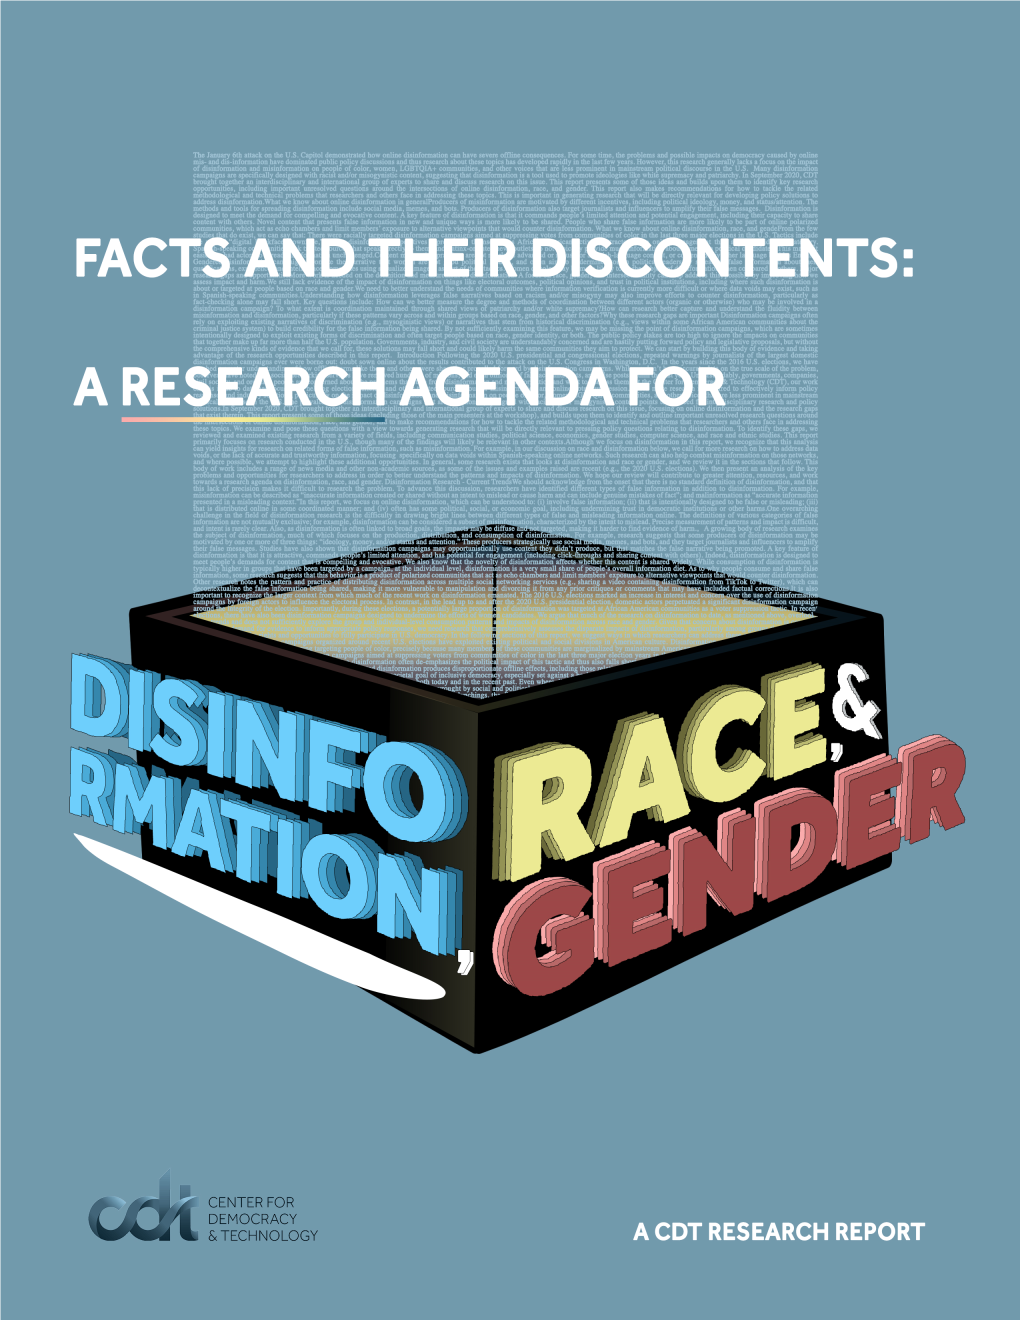 A Research Agenda for Online Disinformation, Race, and Gender